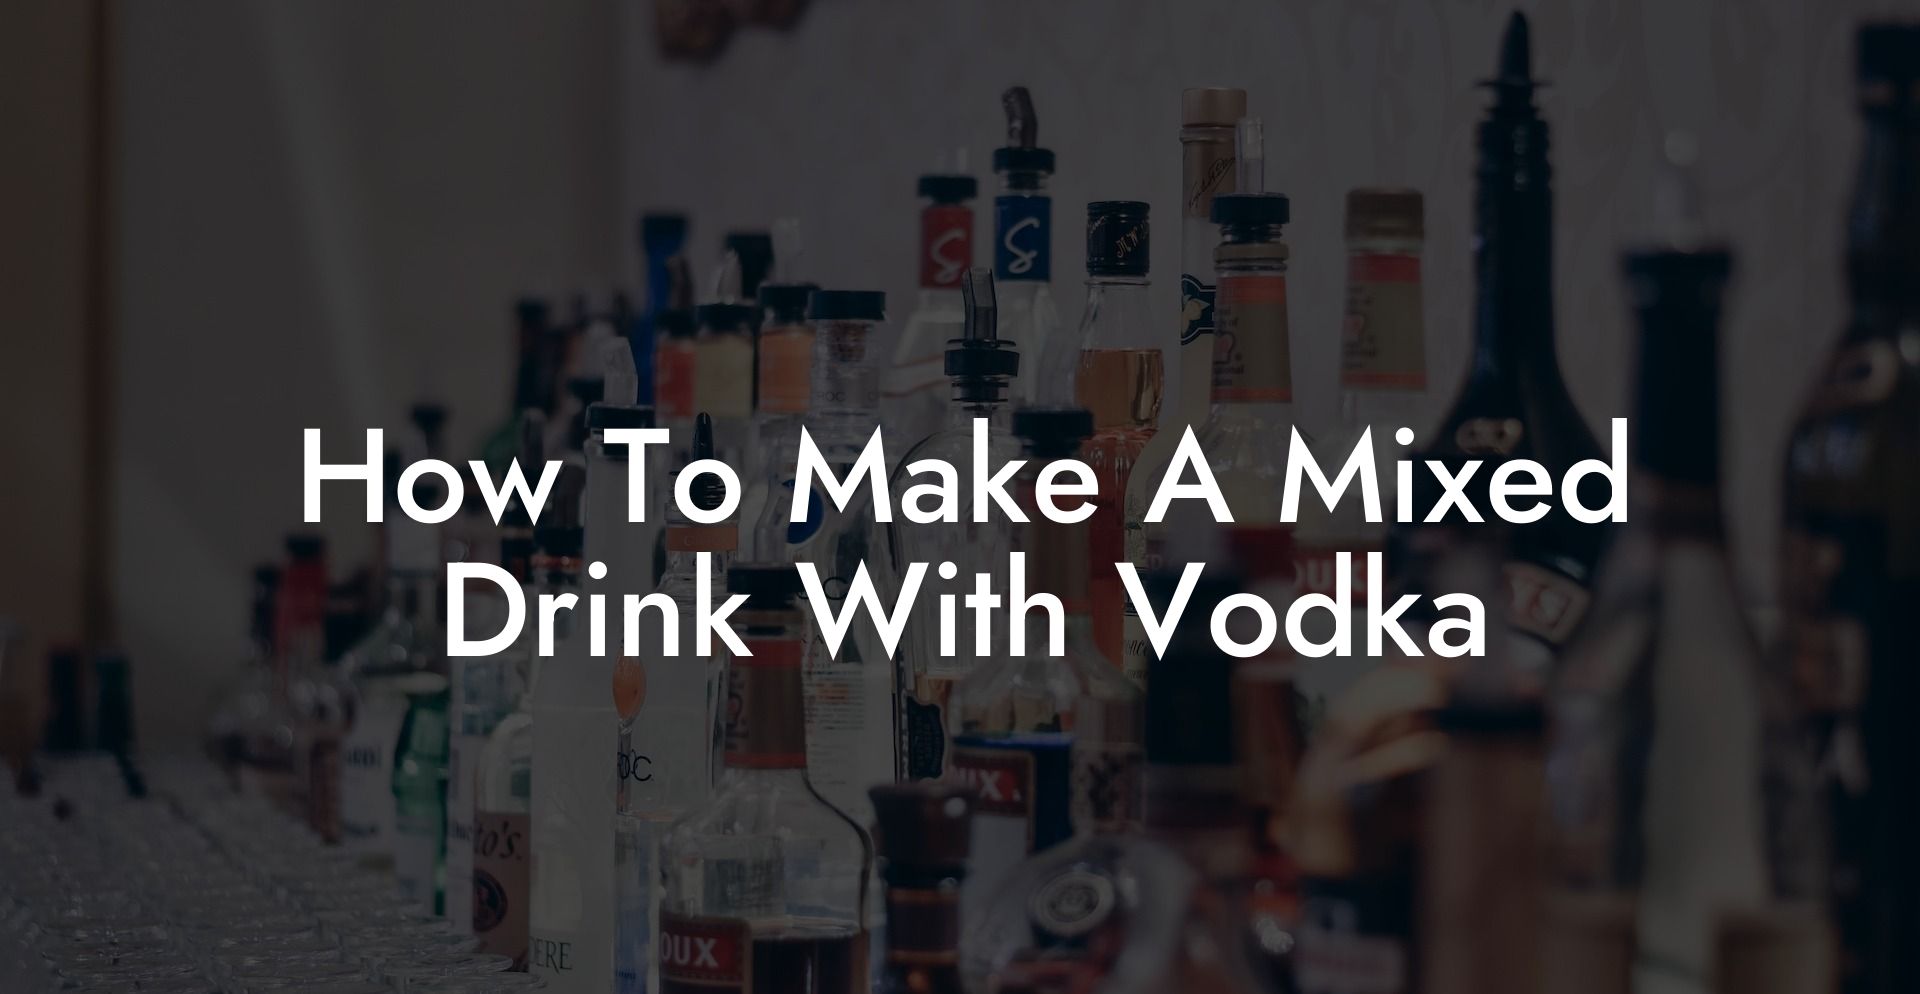 How To Make A Mixed Drink With Vodka